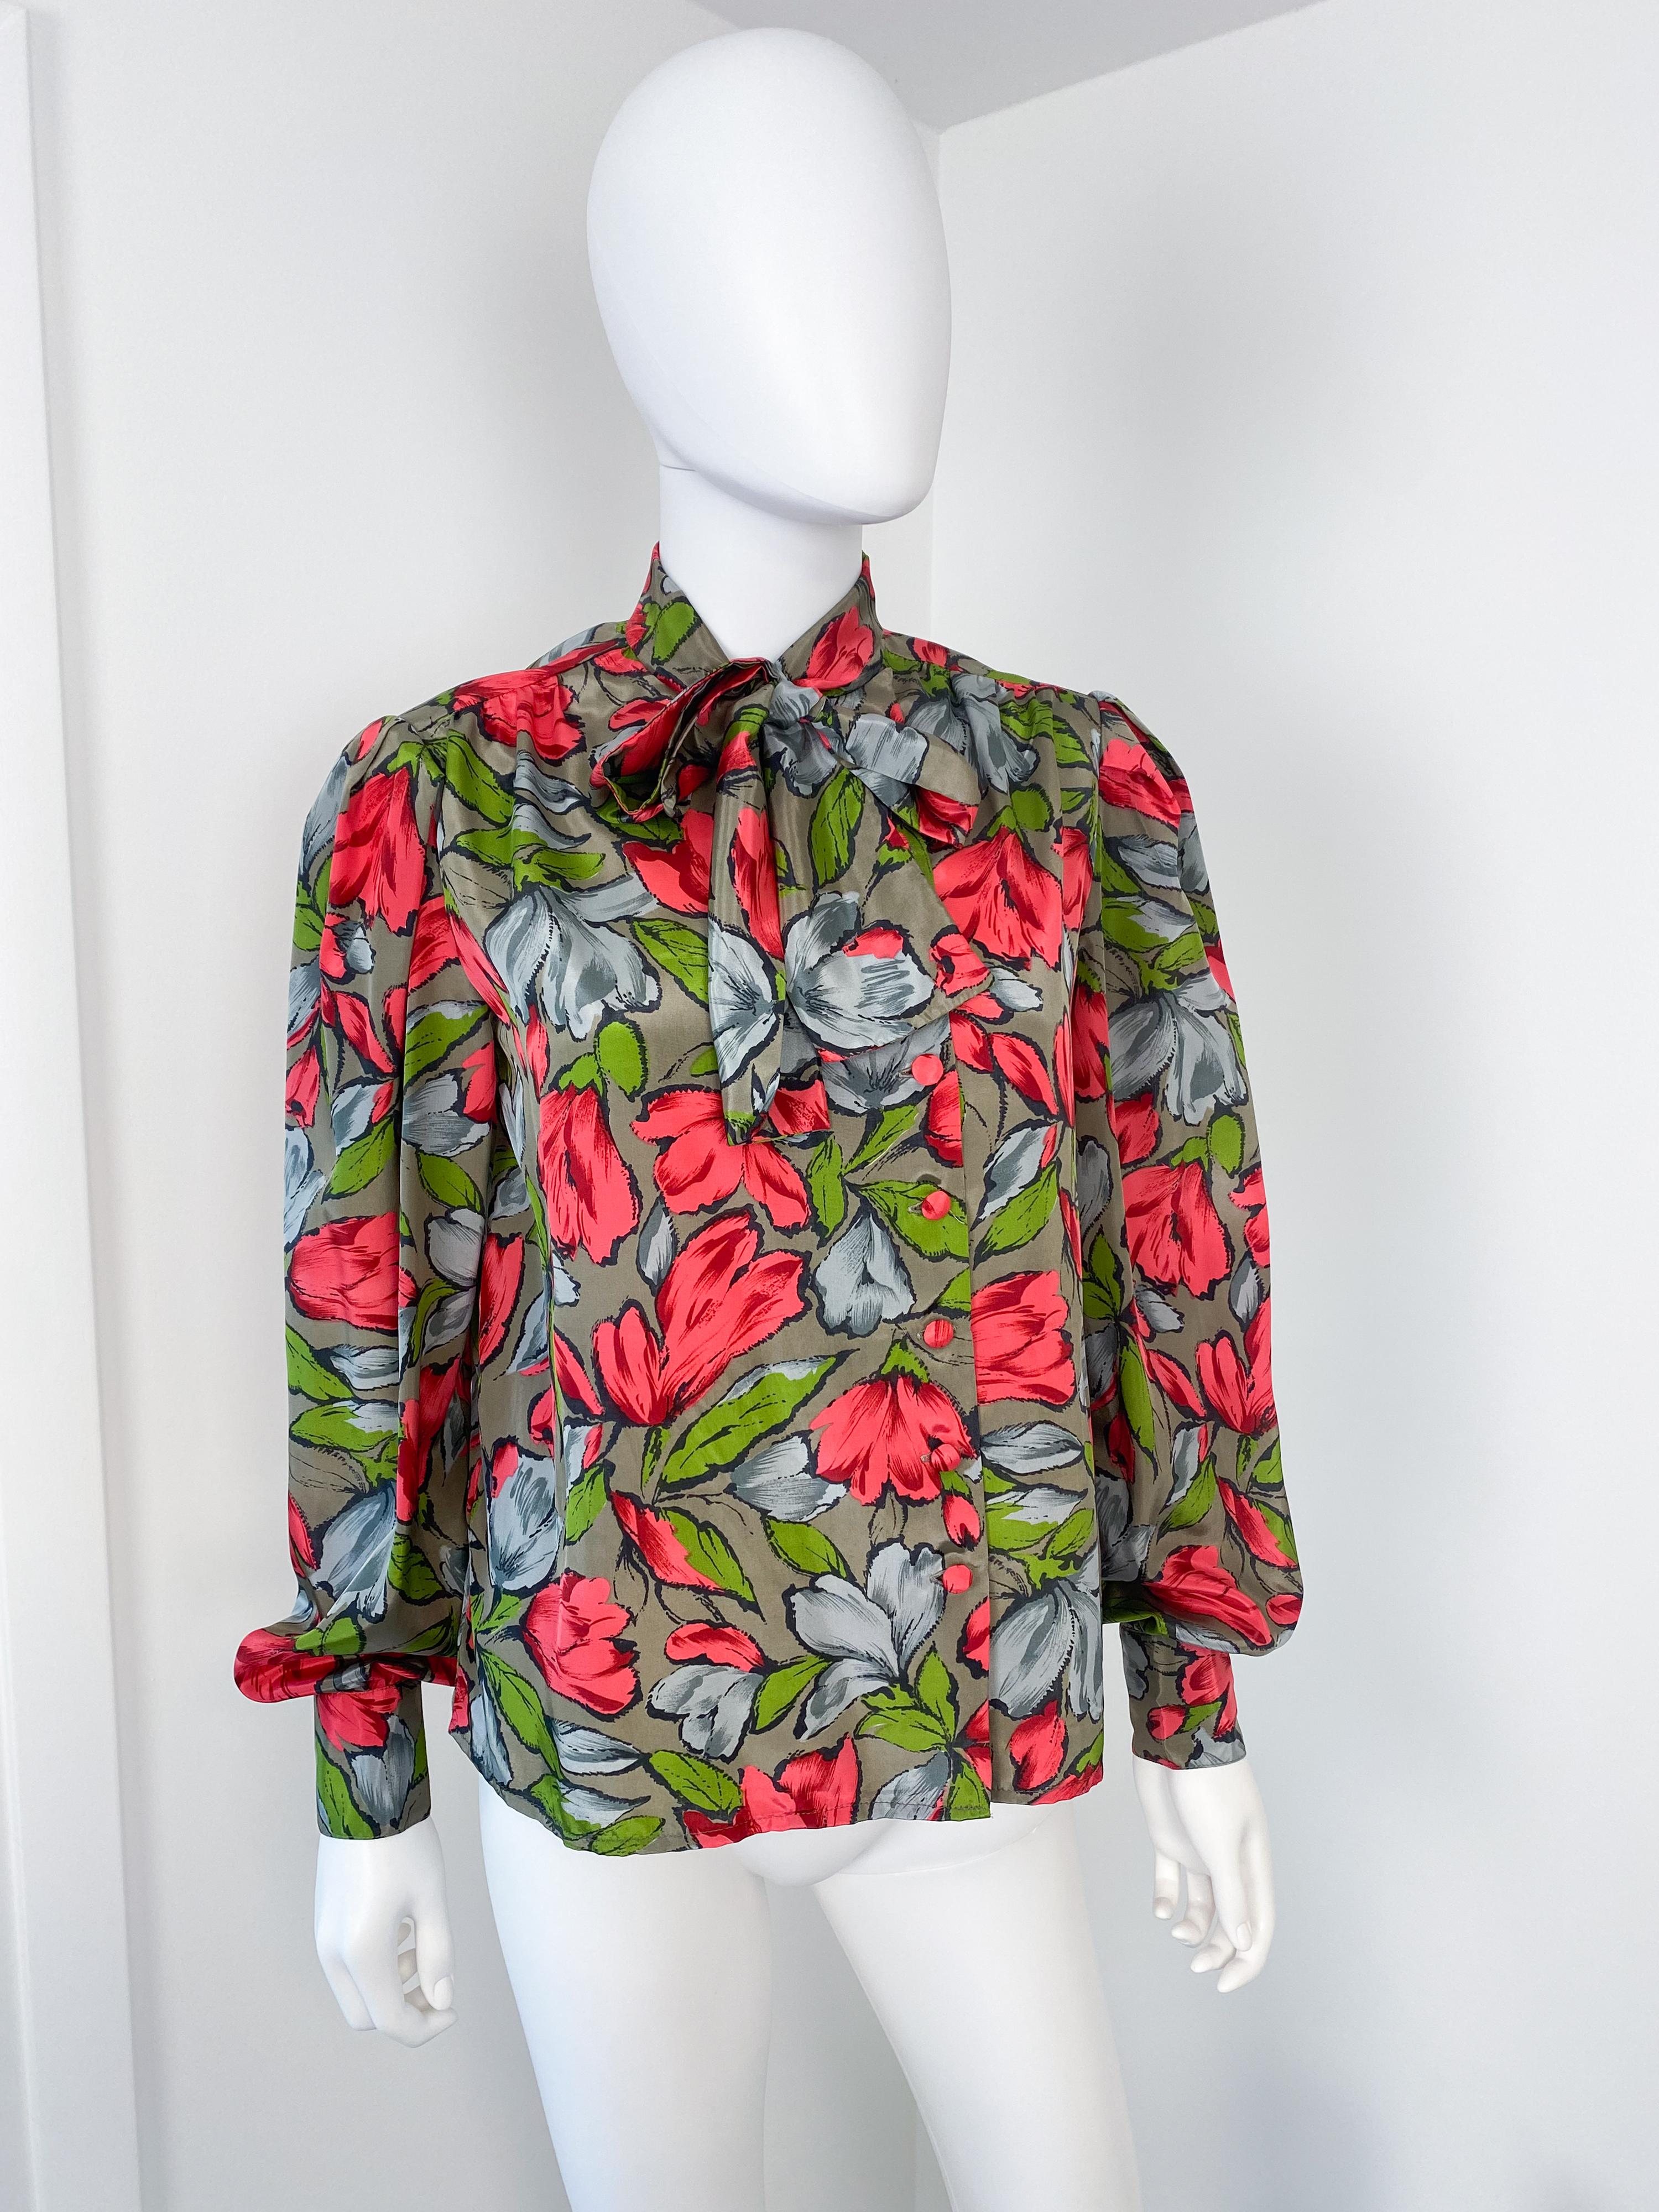 Women's or Men's Vintage 1980s Silky Polyester Blouse Top Red and Gray Flowers Size 8/10 For Sale